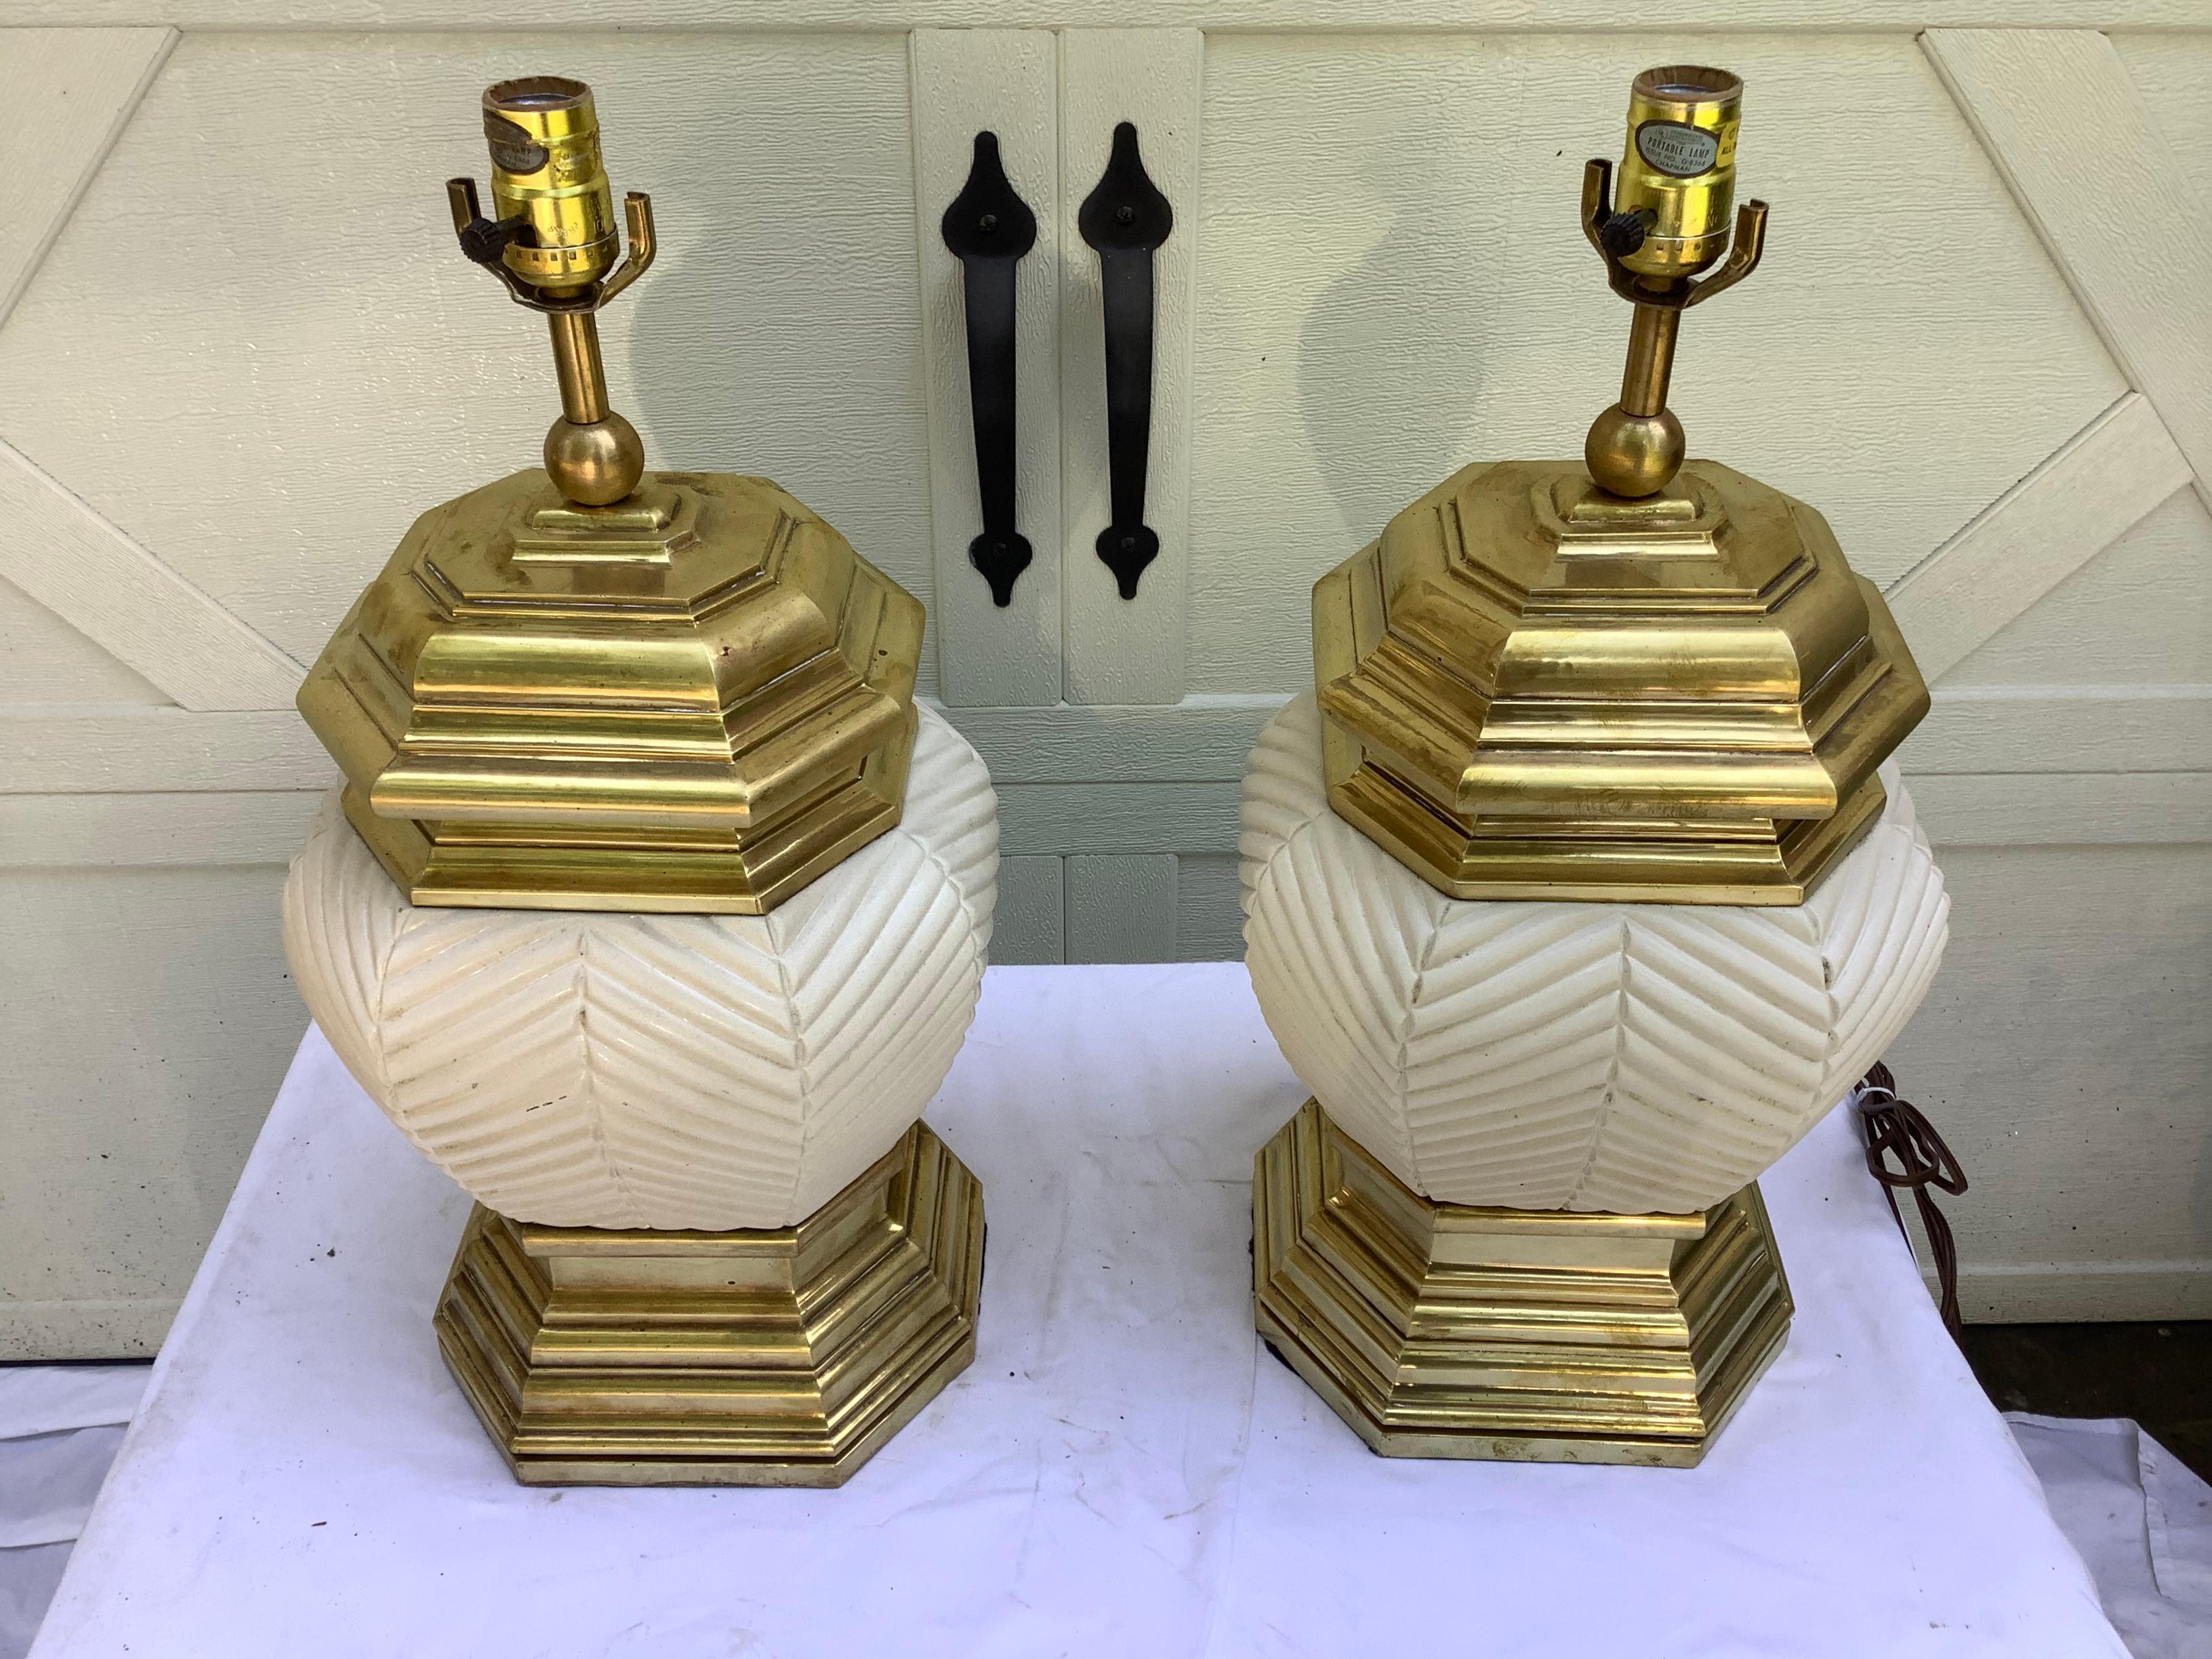 Hunky pair of 1970s brass and ceramic lamps by Chapman. ( one of my favorite lamp companies). The ceramic portion has a crosshatched bamboo effect., in a neutral beige. The brass has been cleaned, but unlacquered. 20 “ H to the top of the socket.